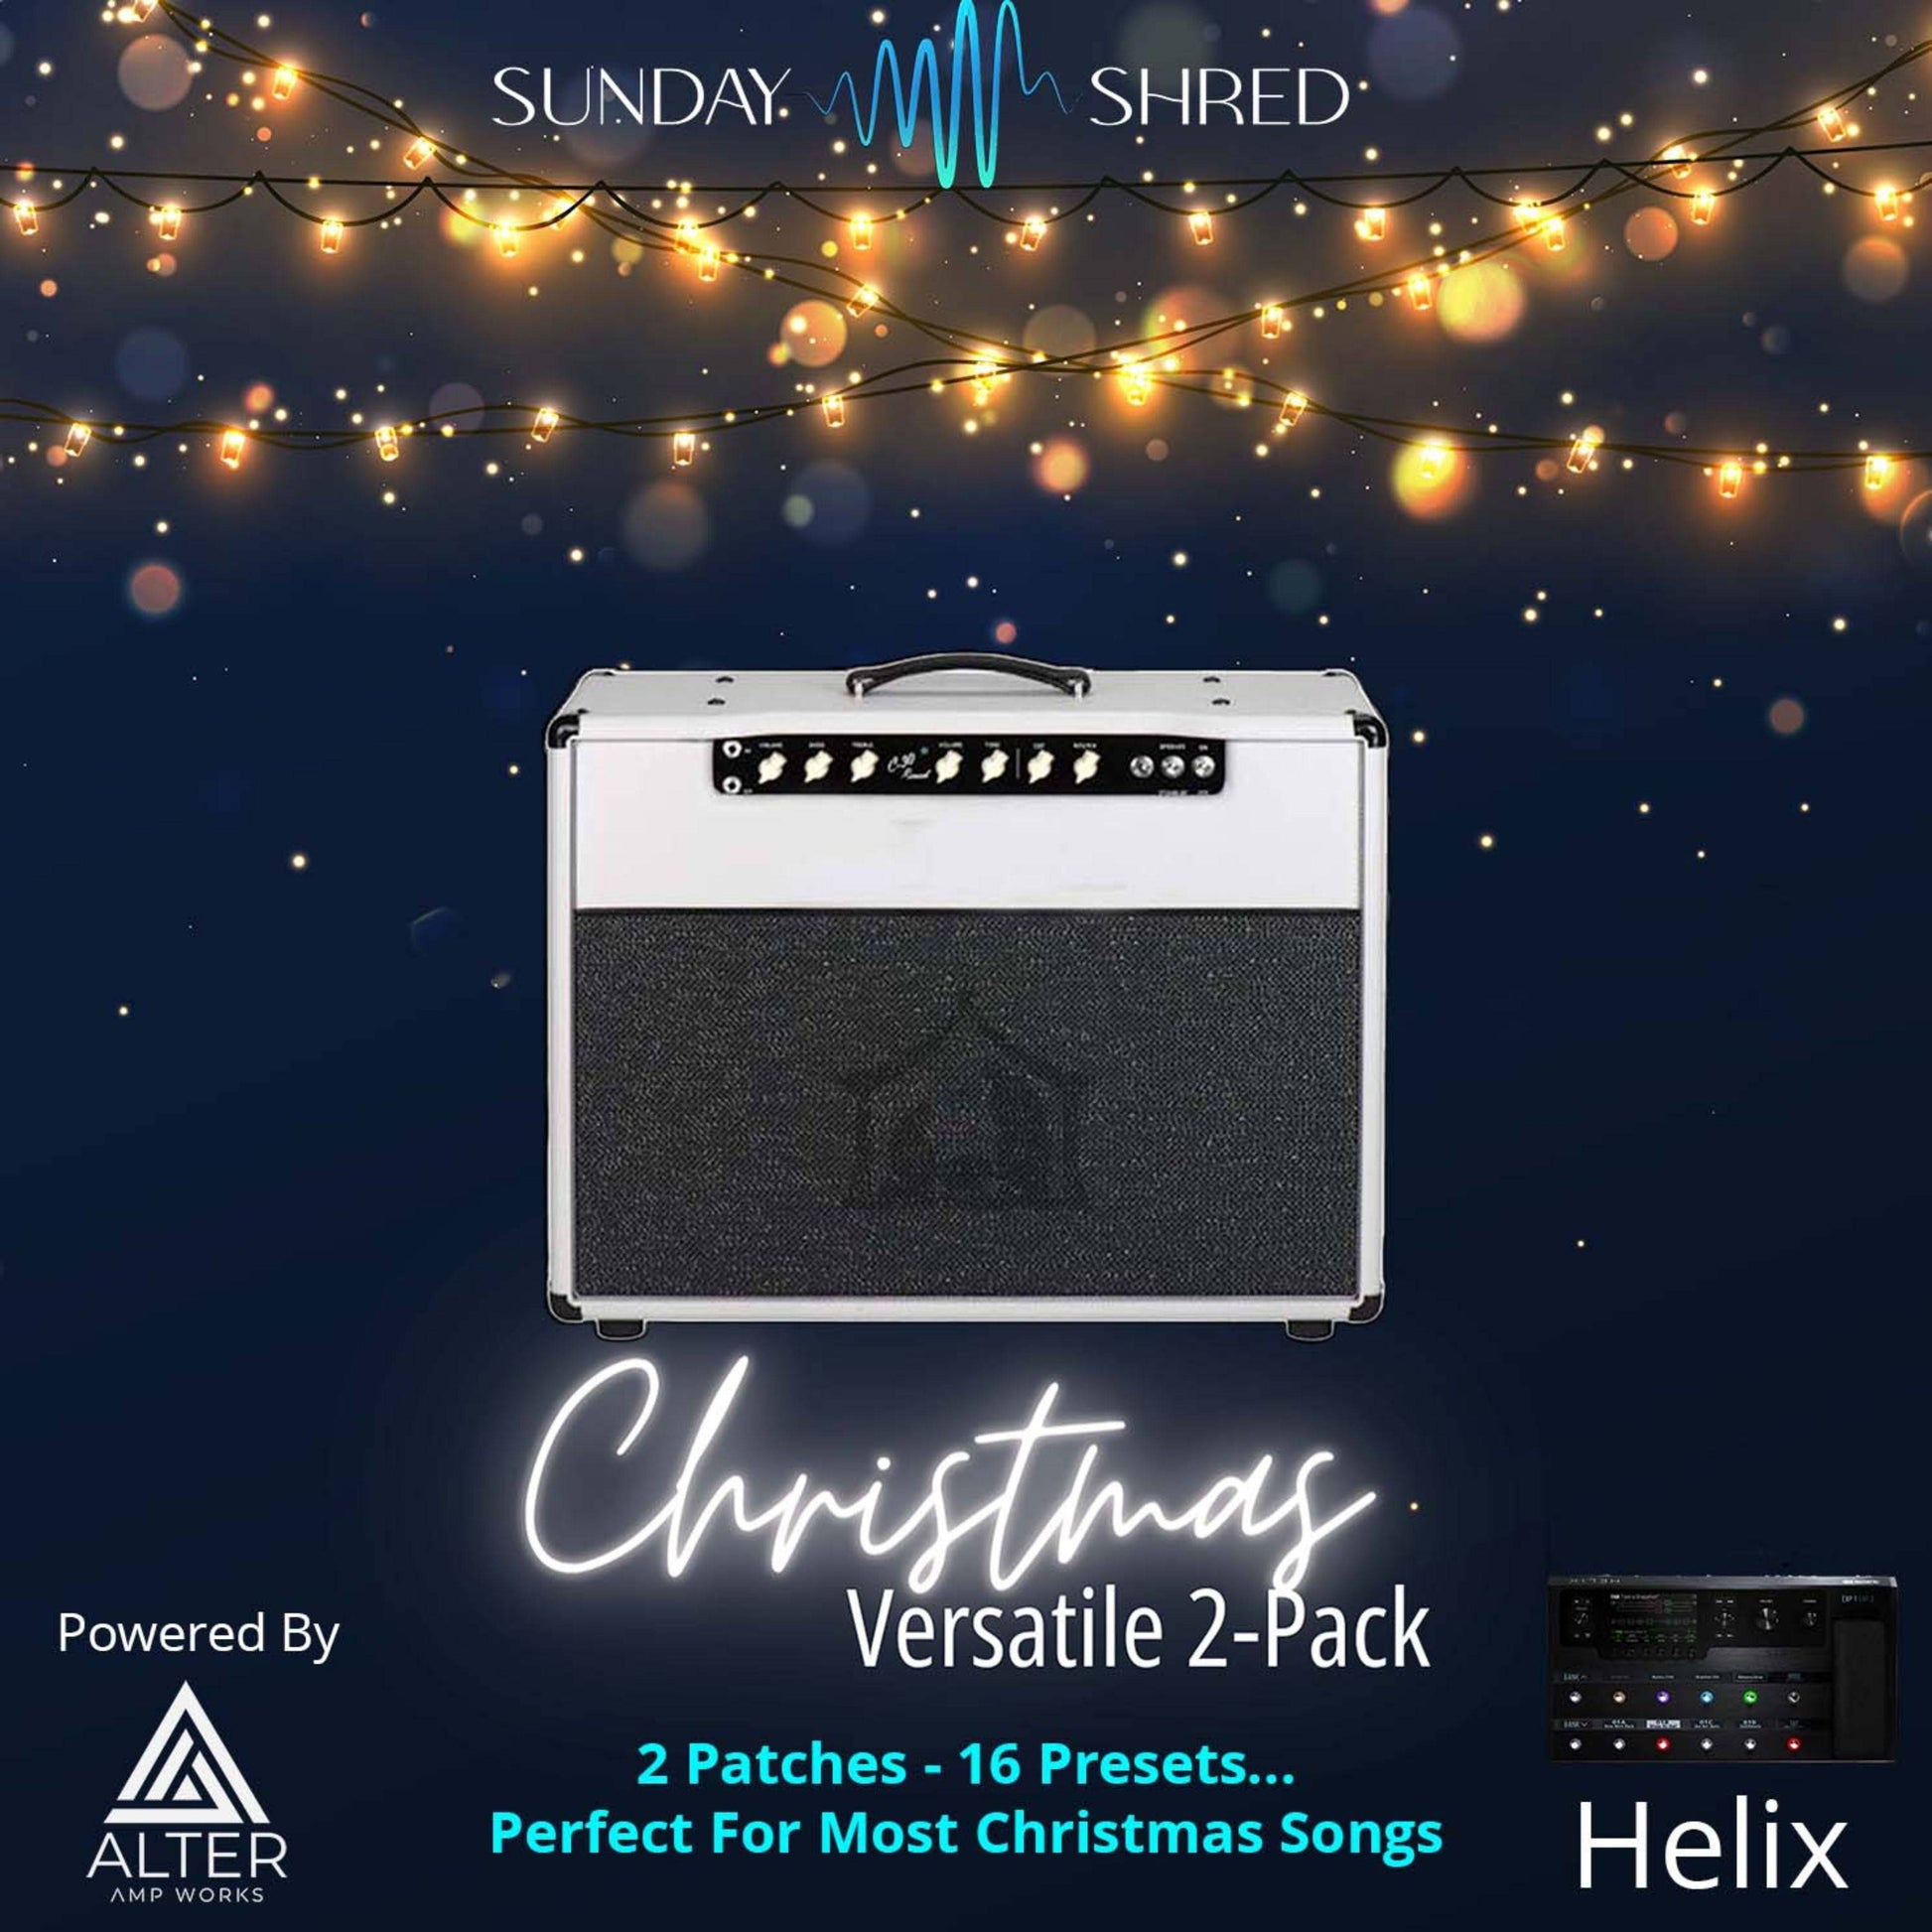 Sunday Shred - Christmas Versatile 2-Pack - Helix Patch